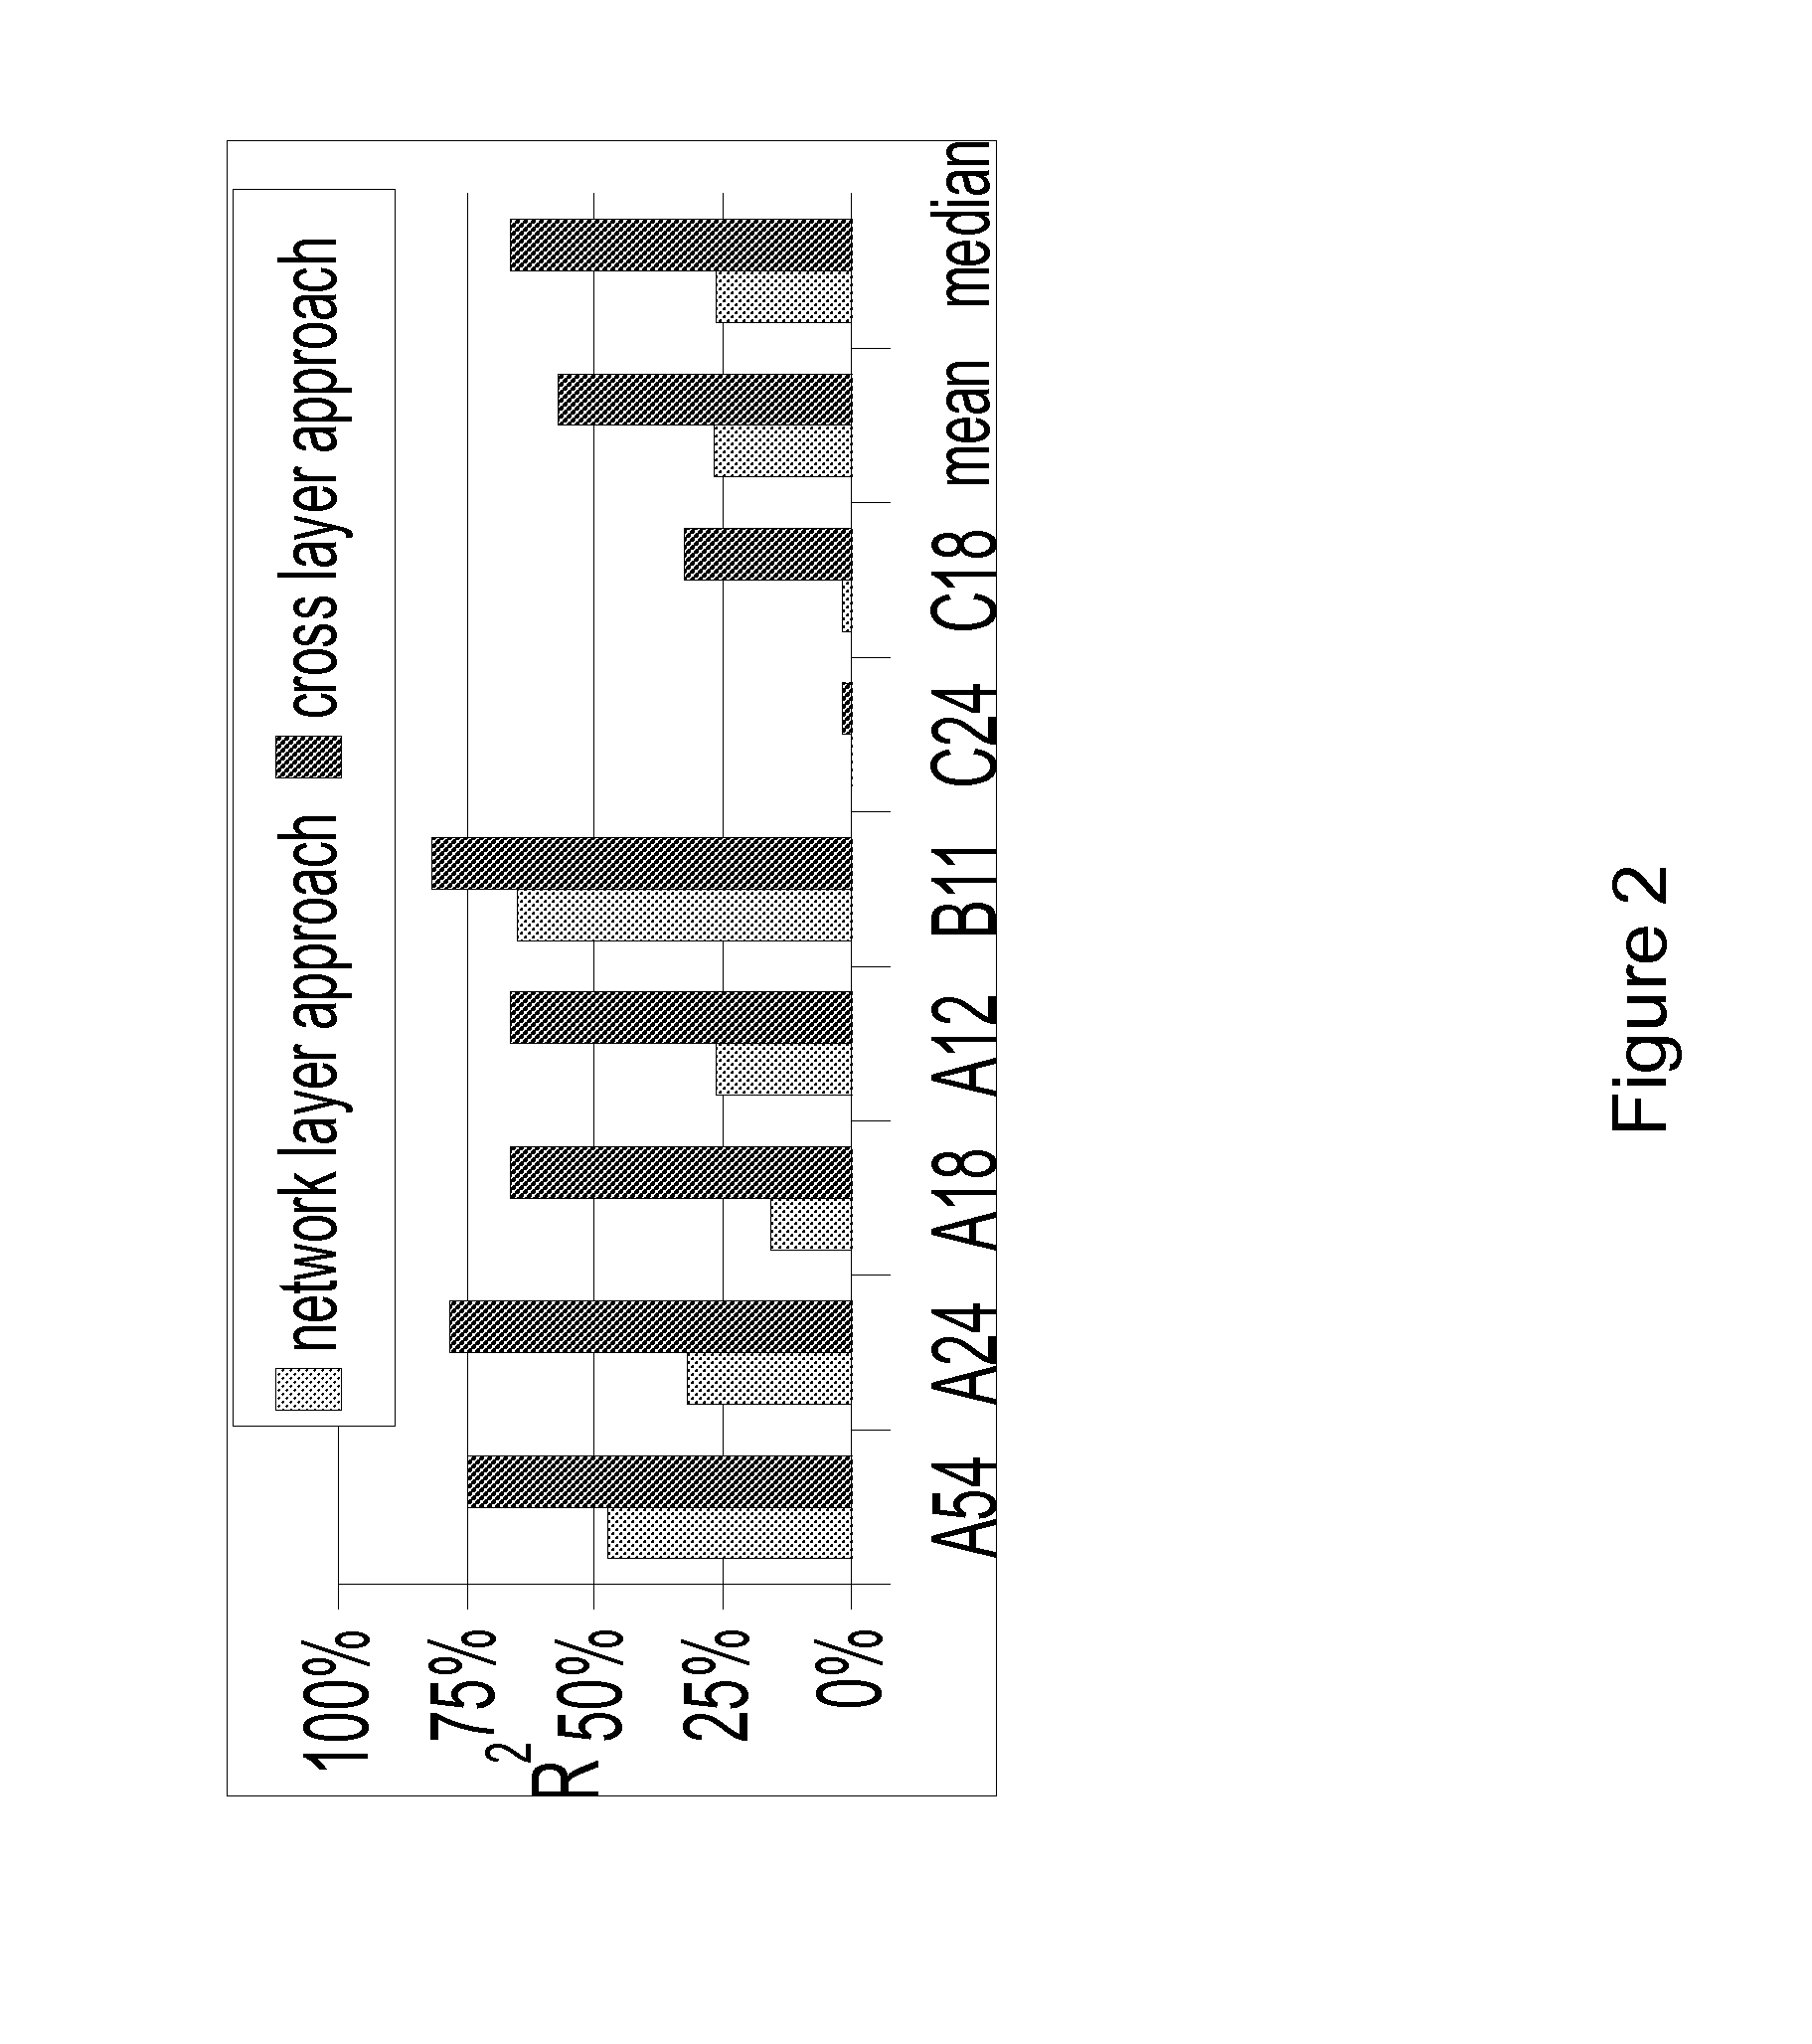 Method for evaluating link cost metrics in communication networks